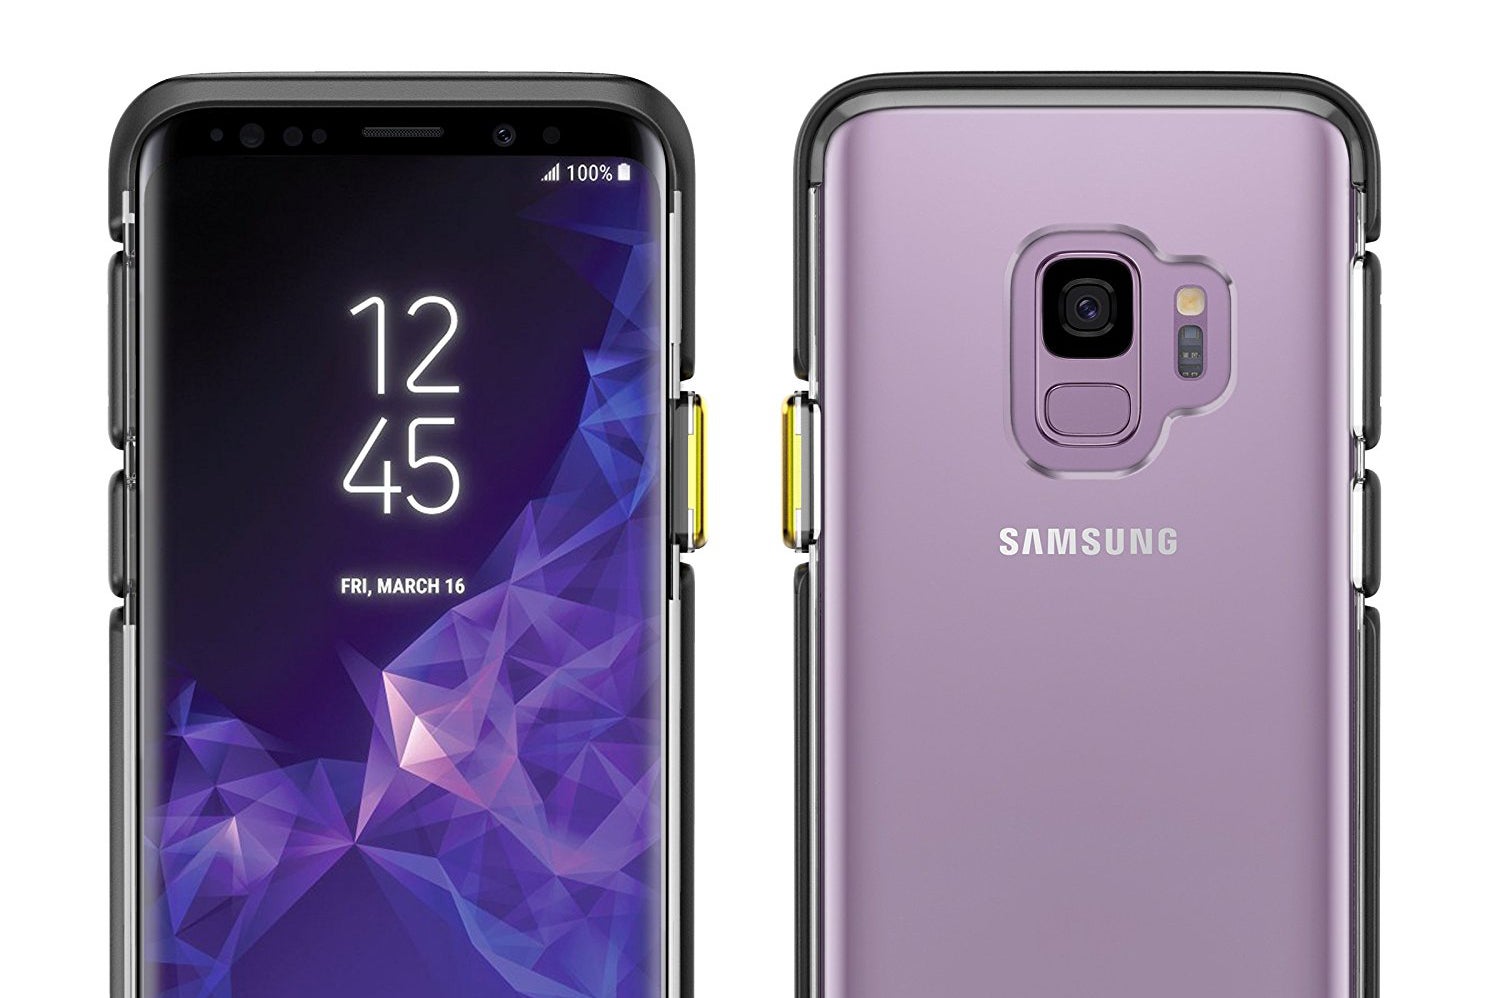 Best bumper cases for Samsung Galaxy S9 and S9+